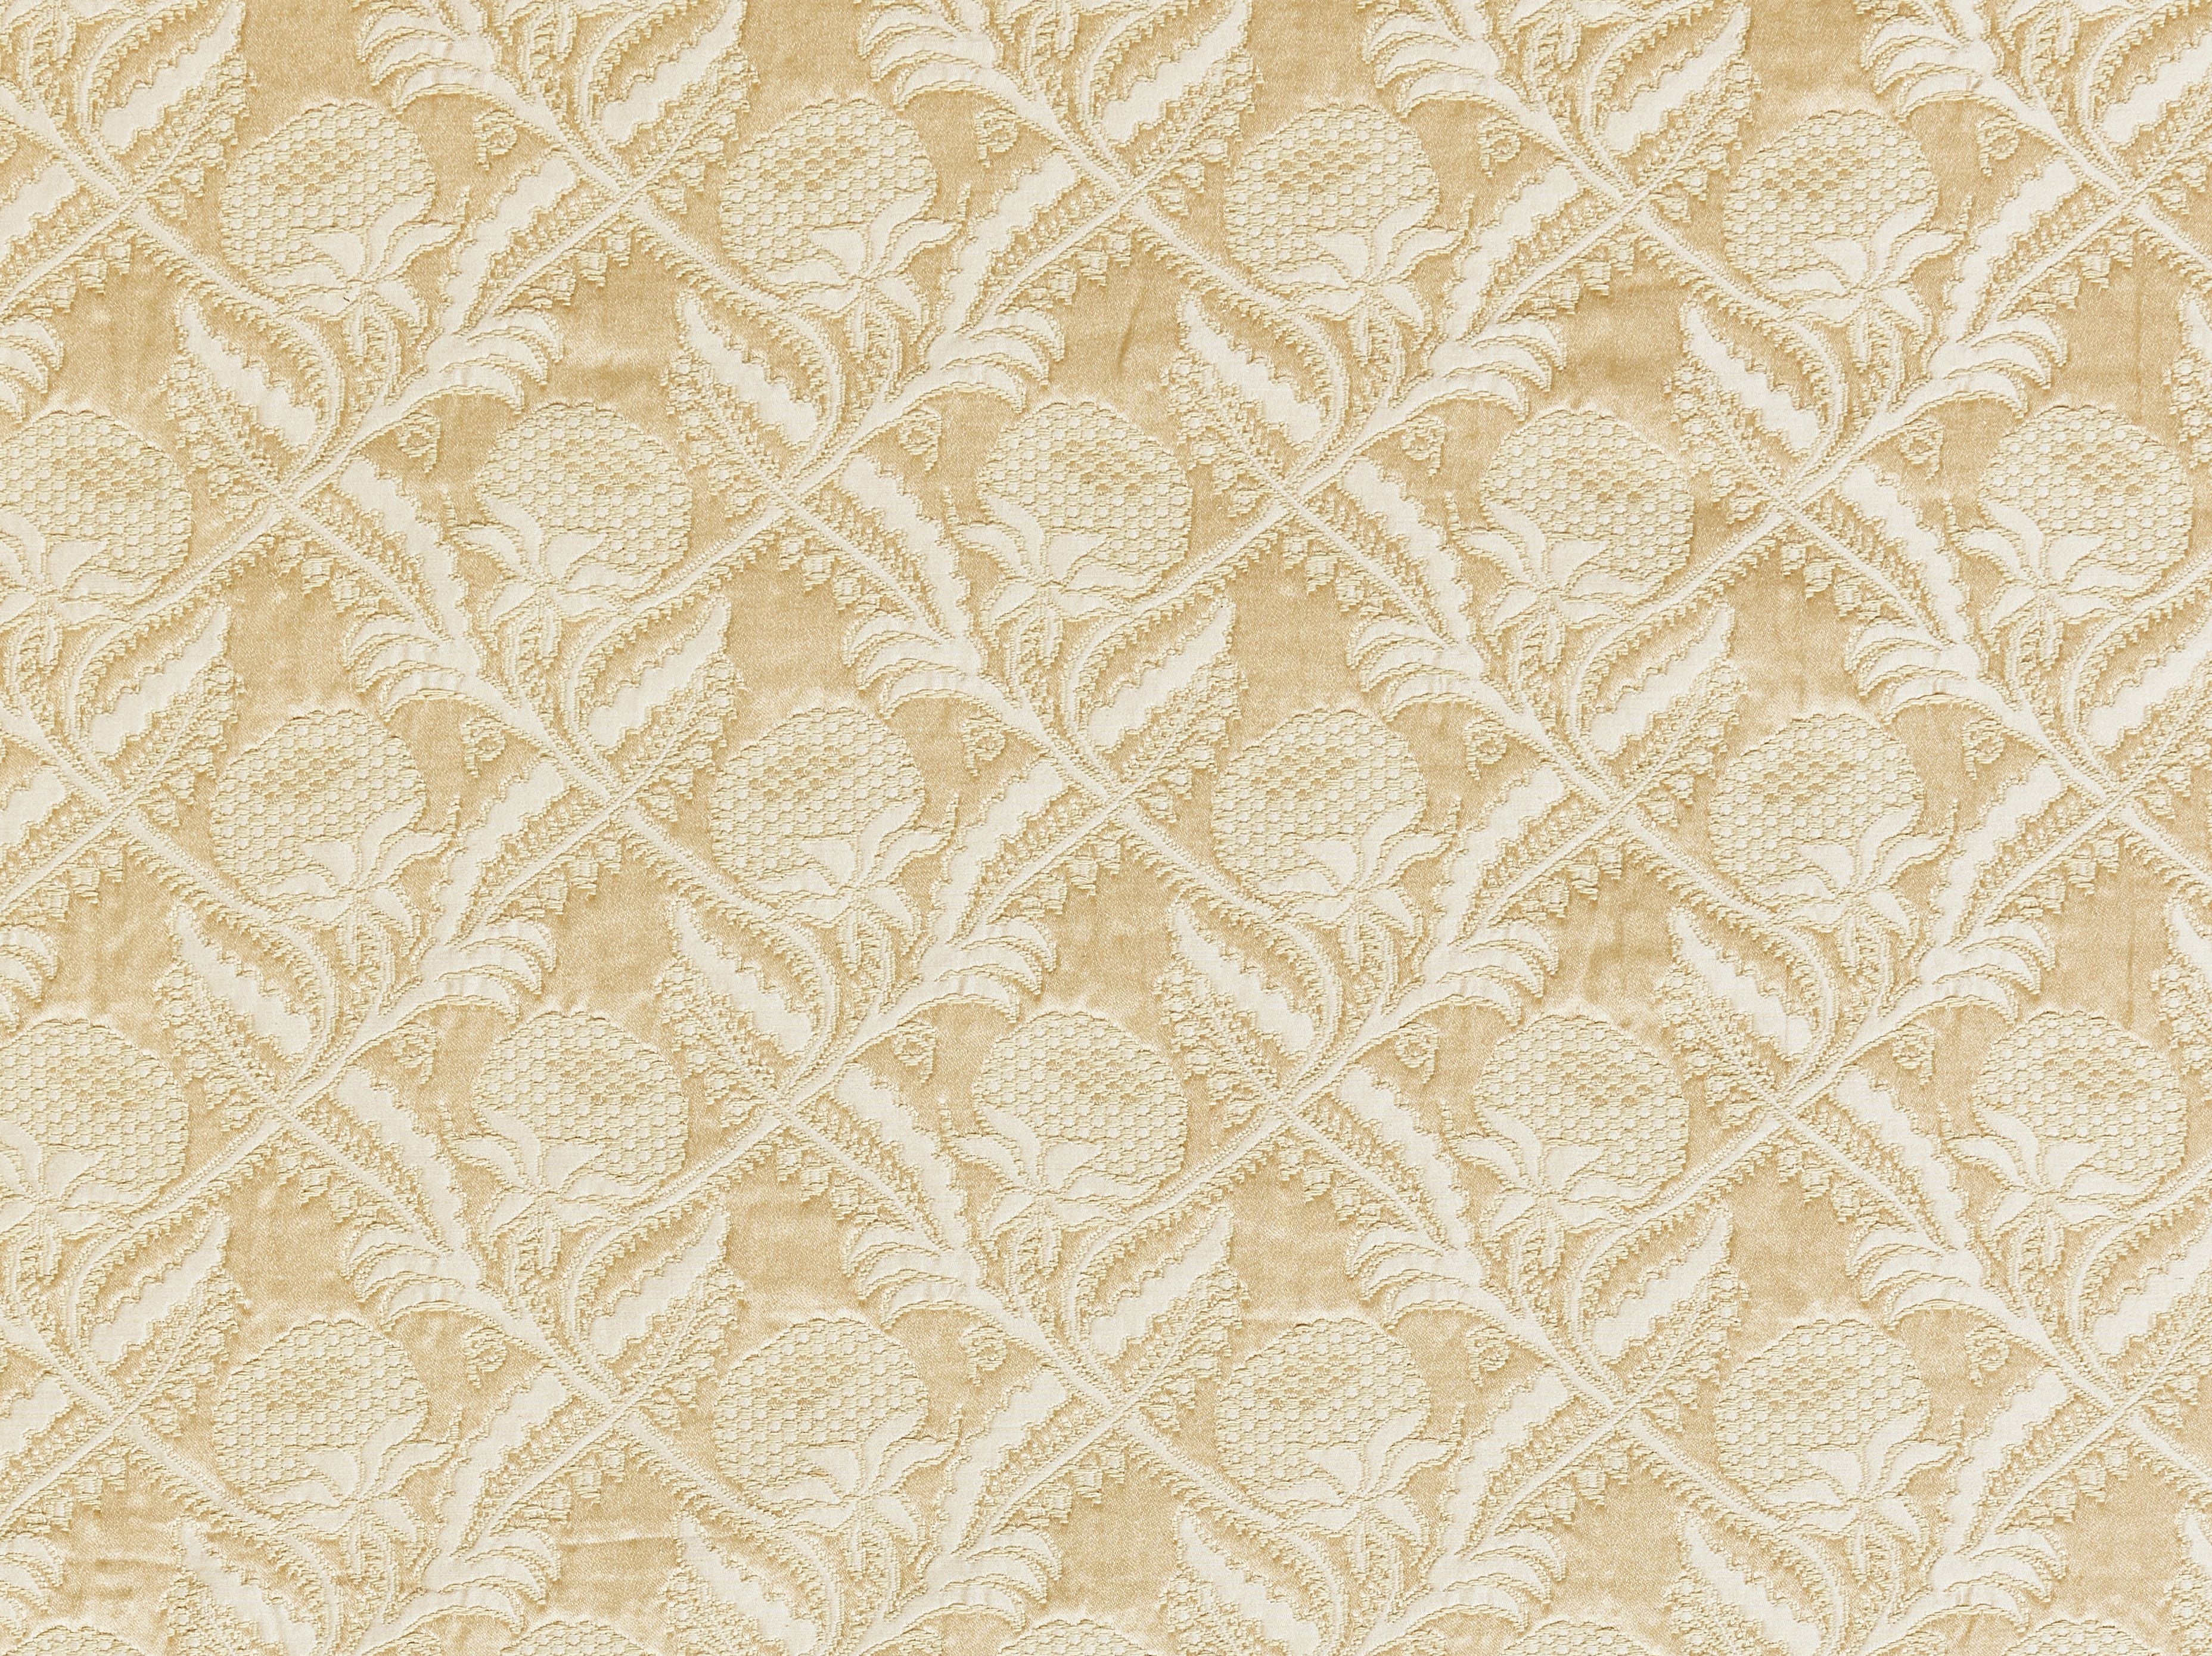 Droguet Lampas fabric in beige color - pattern number A0 00017588 - by Scalamandre in the Old World Weavers collection